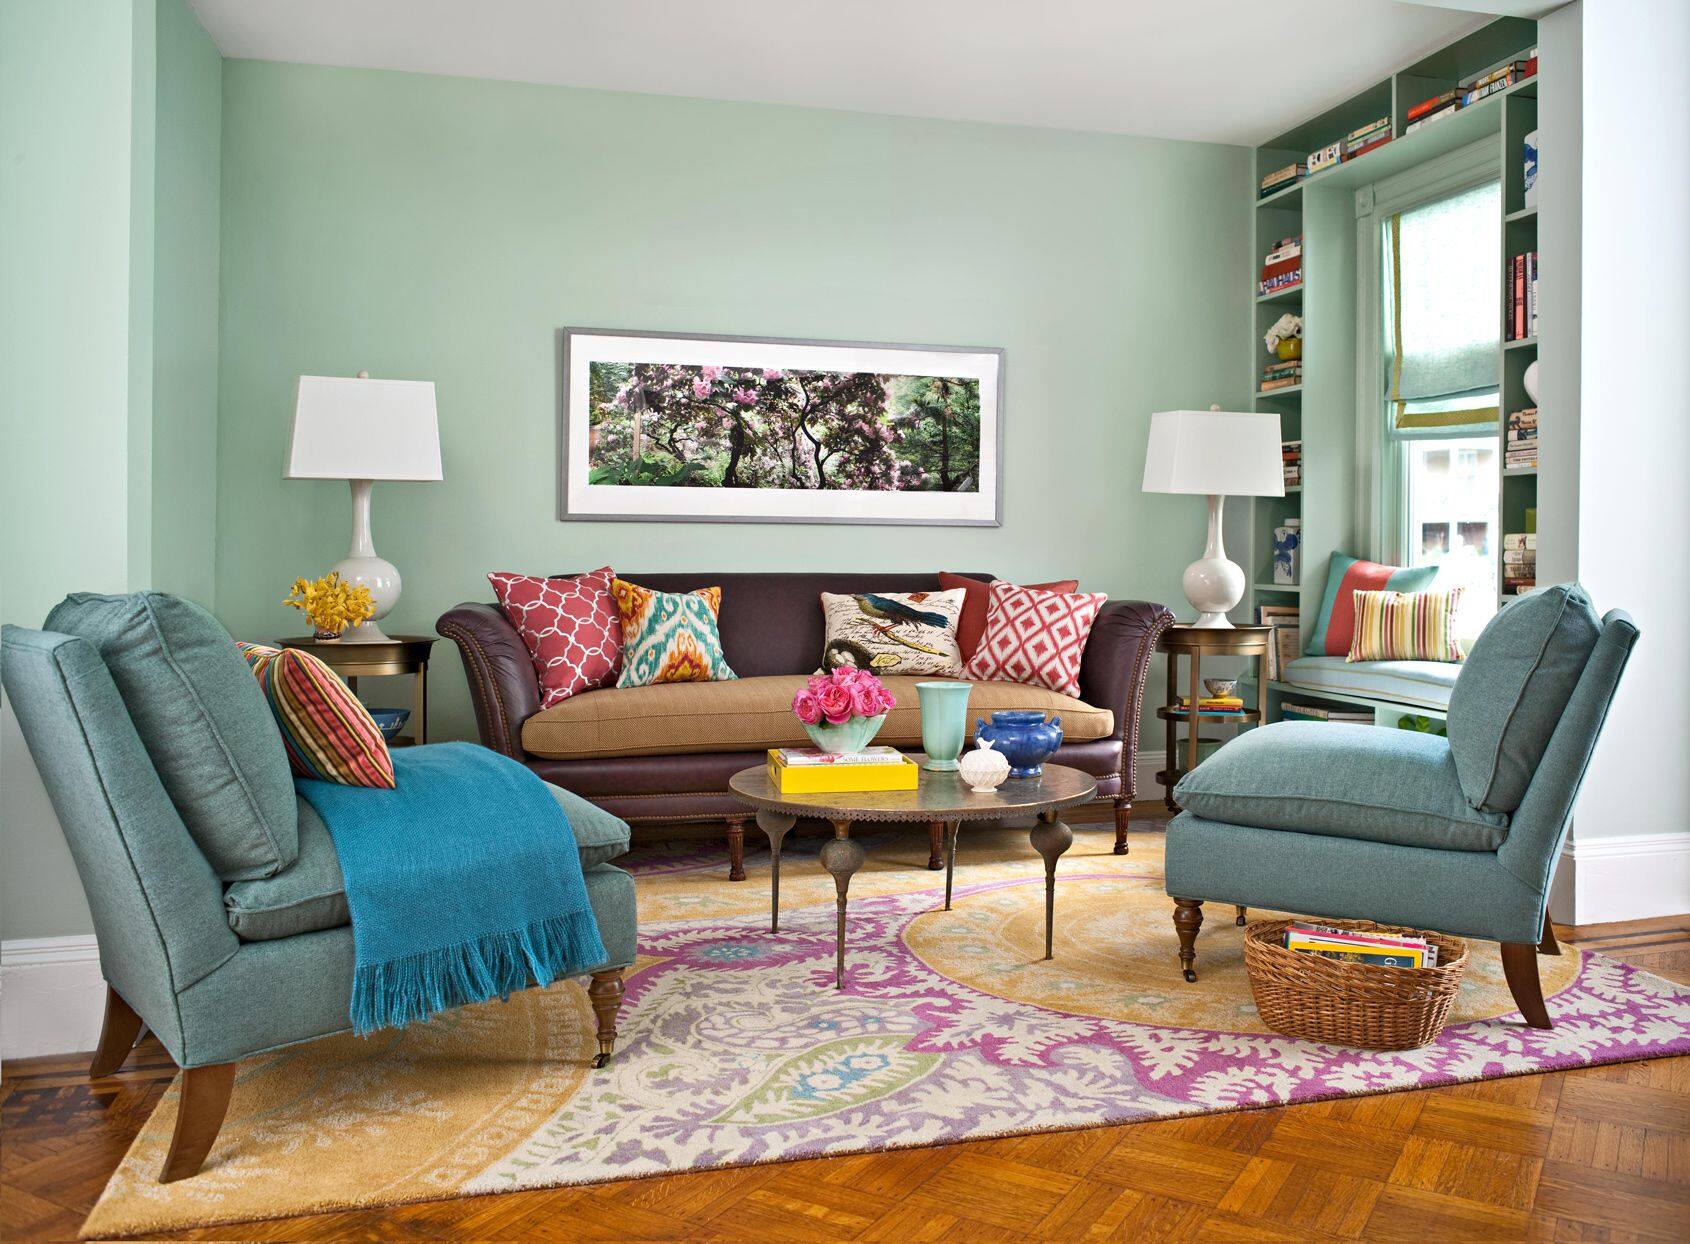 How To Add Color To Living Room